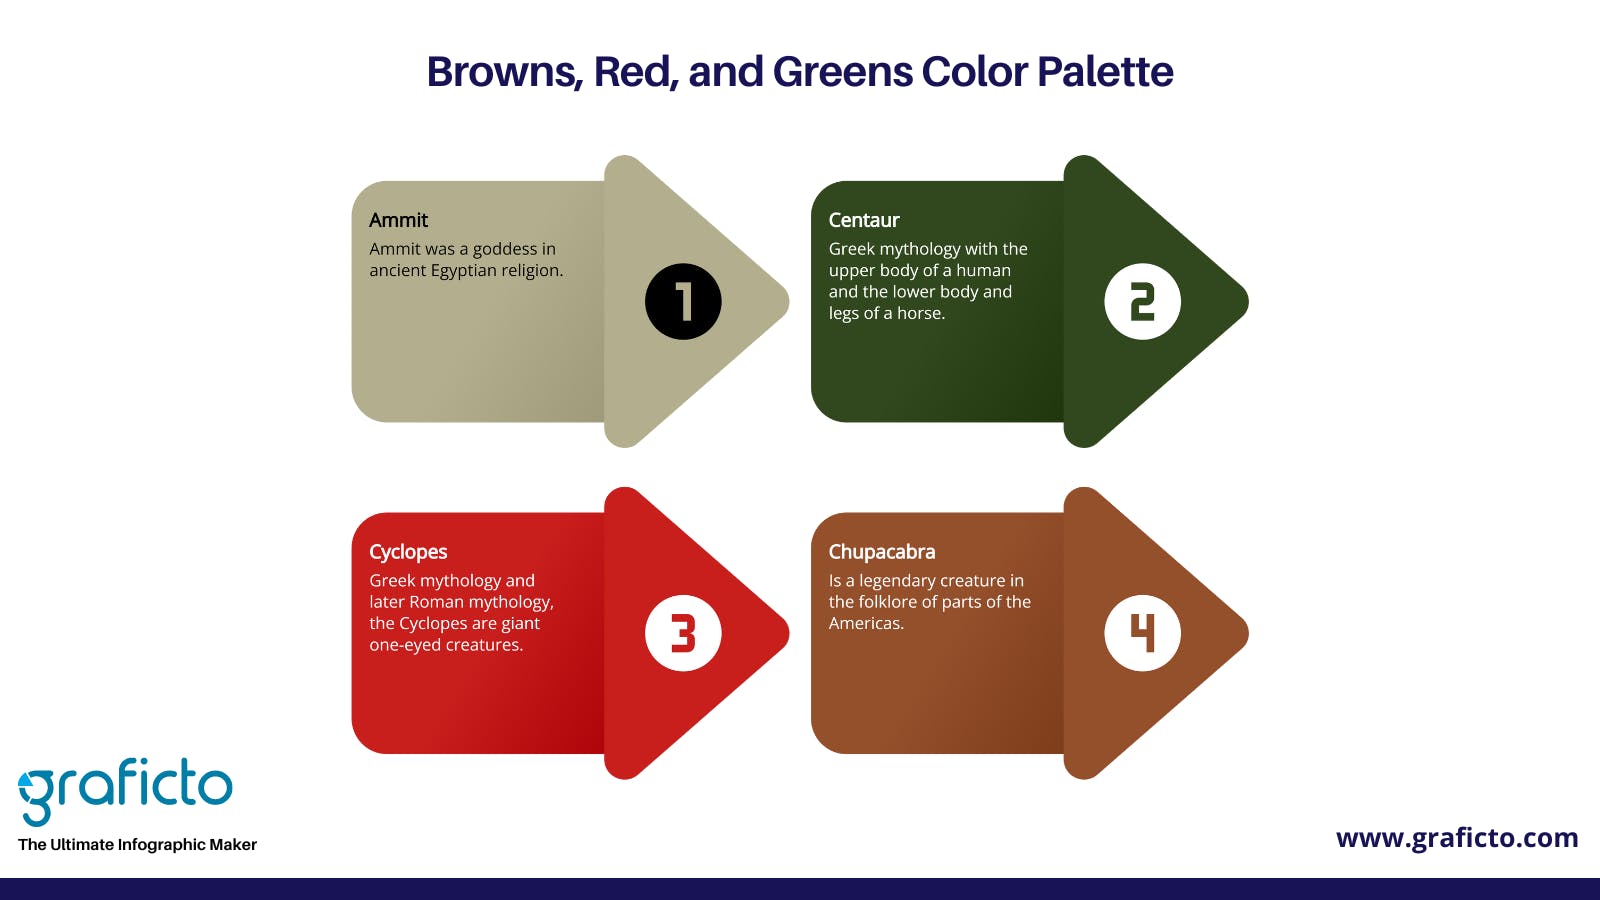 Browns, Red, and Greens graficto Christmas Color Palettes